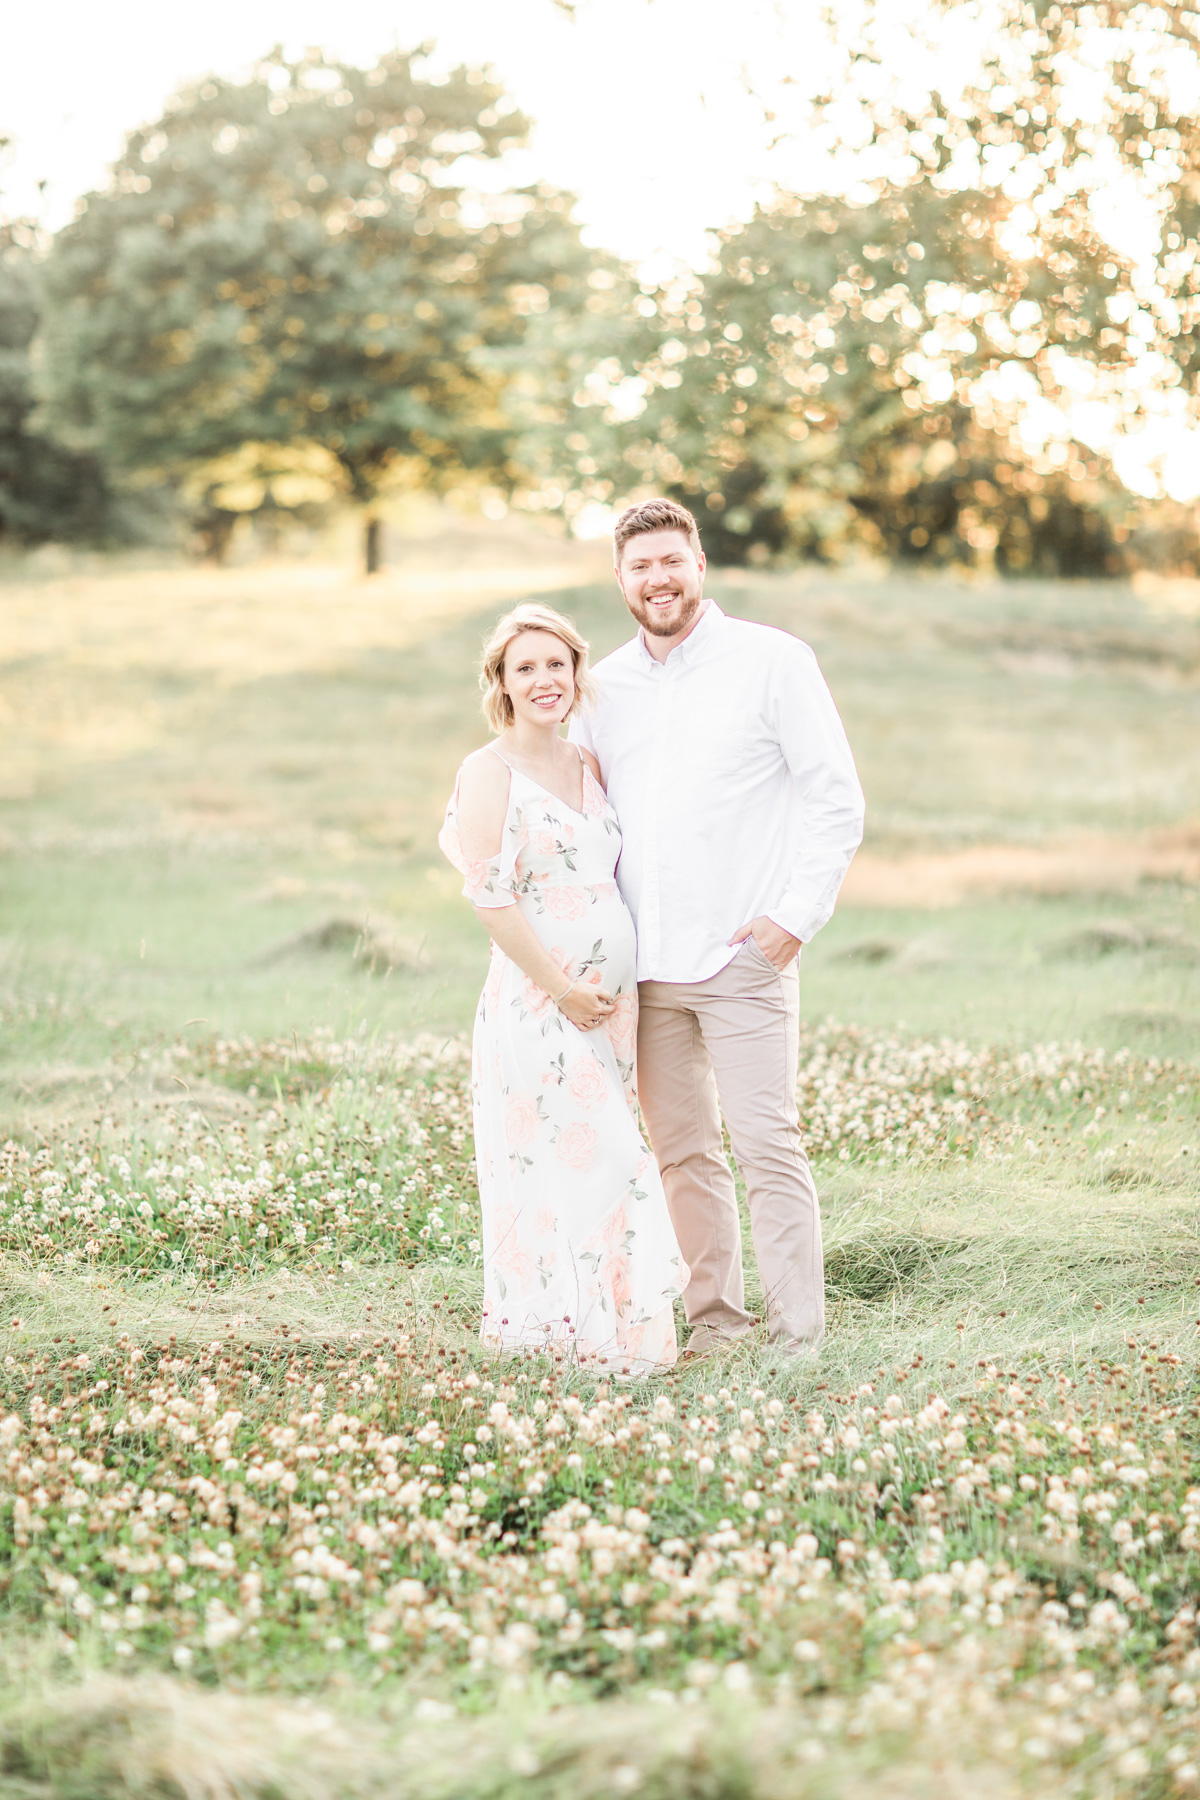 ERIN DAVISON PHOTOGRAPHY | Cleveland Maternity Photographer, Cleveland Newborn Photographers, Akron, Canton Ohio Maternity Photography, field maternity session, organic baby photography, natural light, light and airy,  film maternity